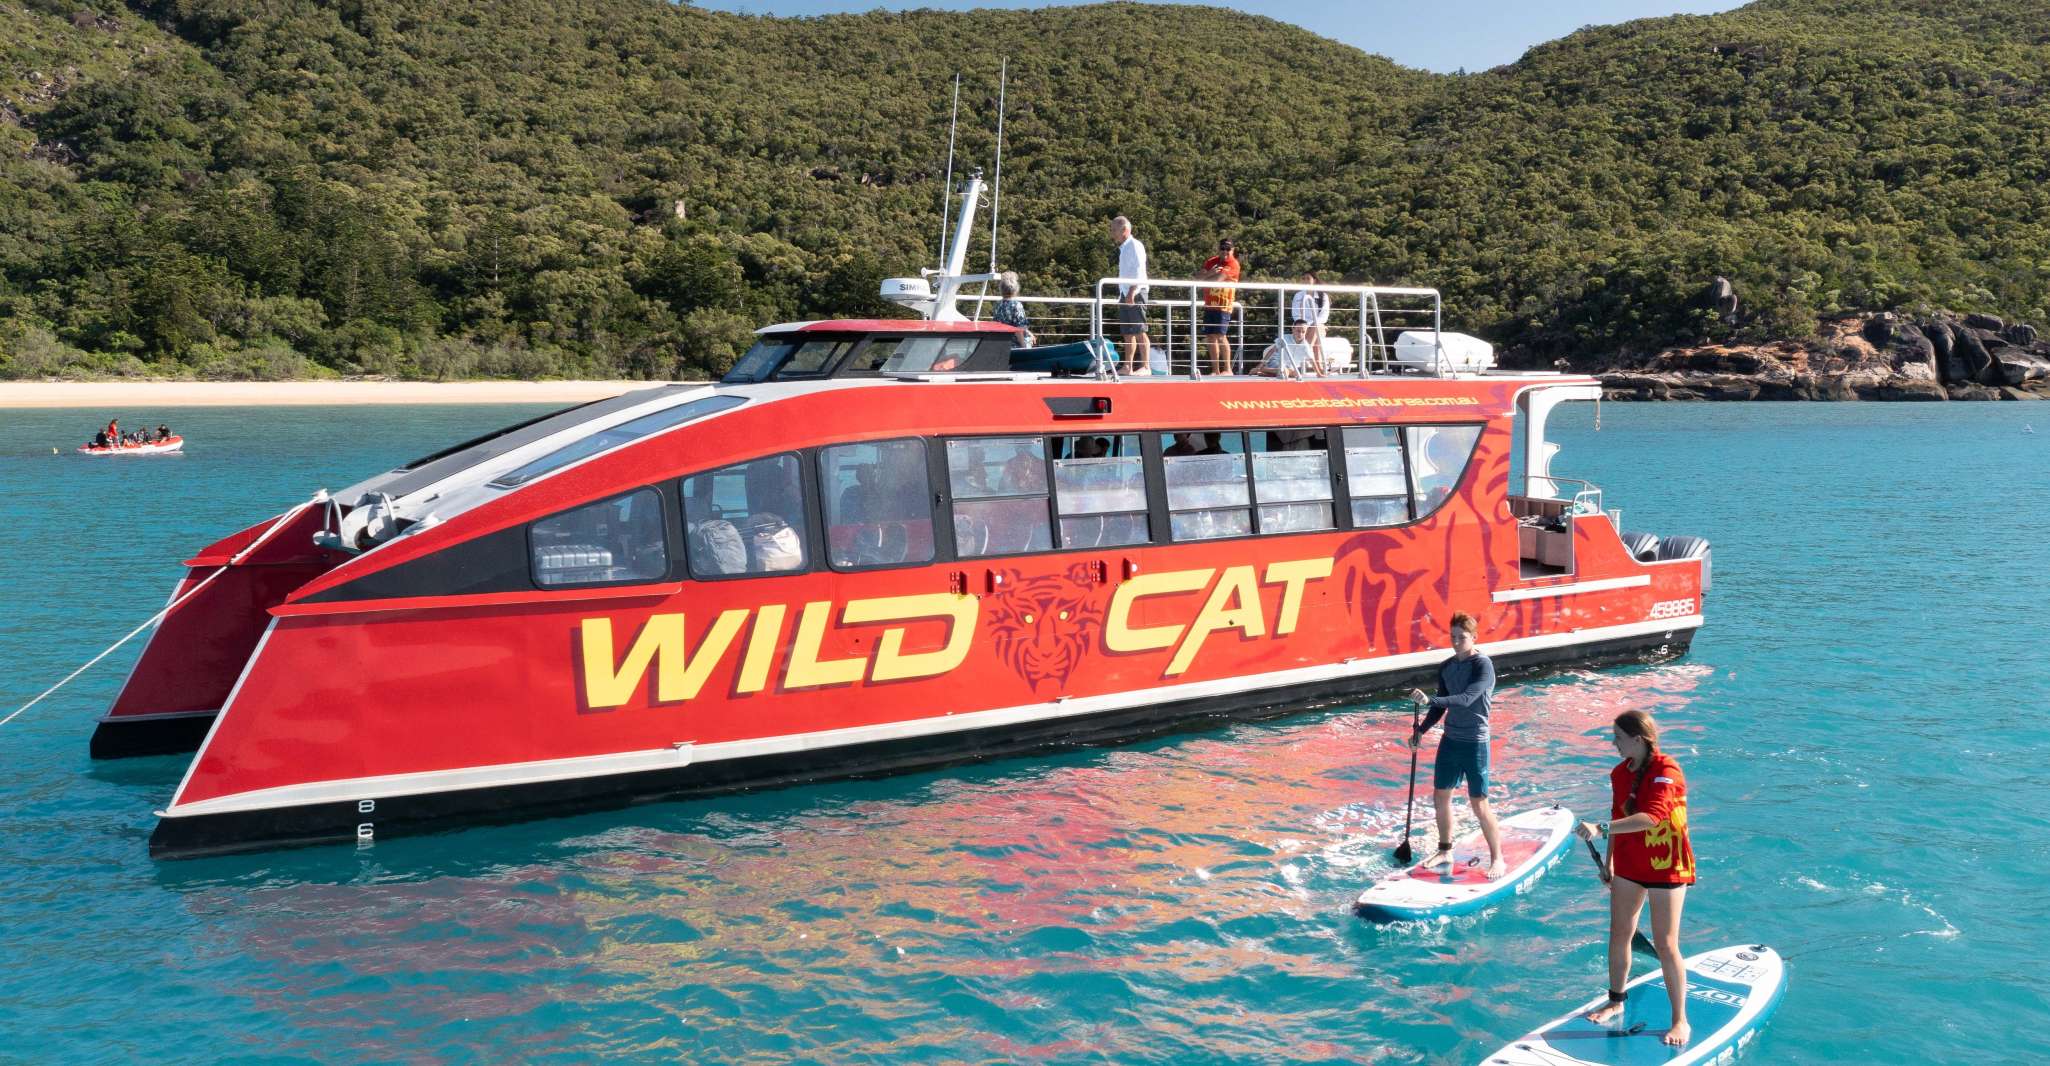 Mackay, Full Day Island Boat Tour on the Great Barrier Reef - Housity